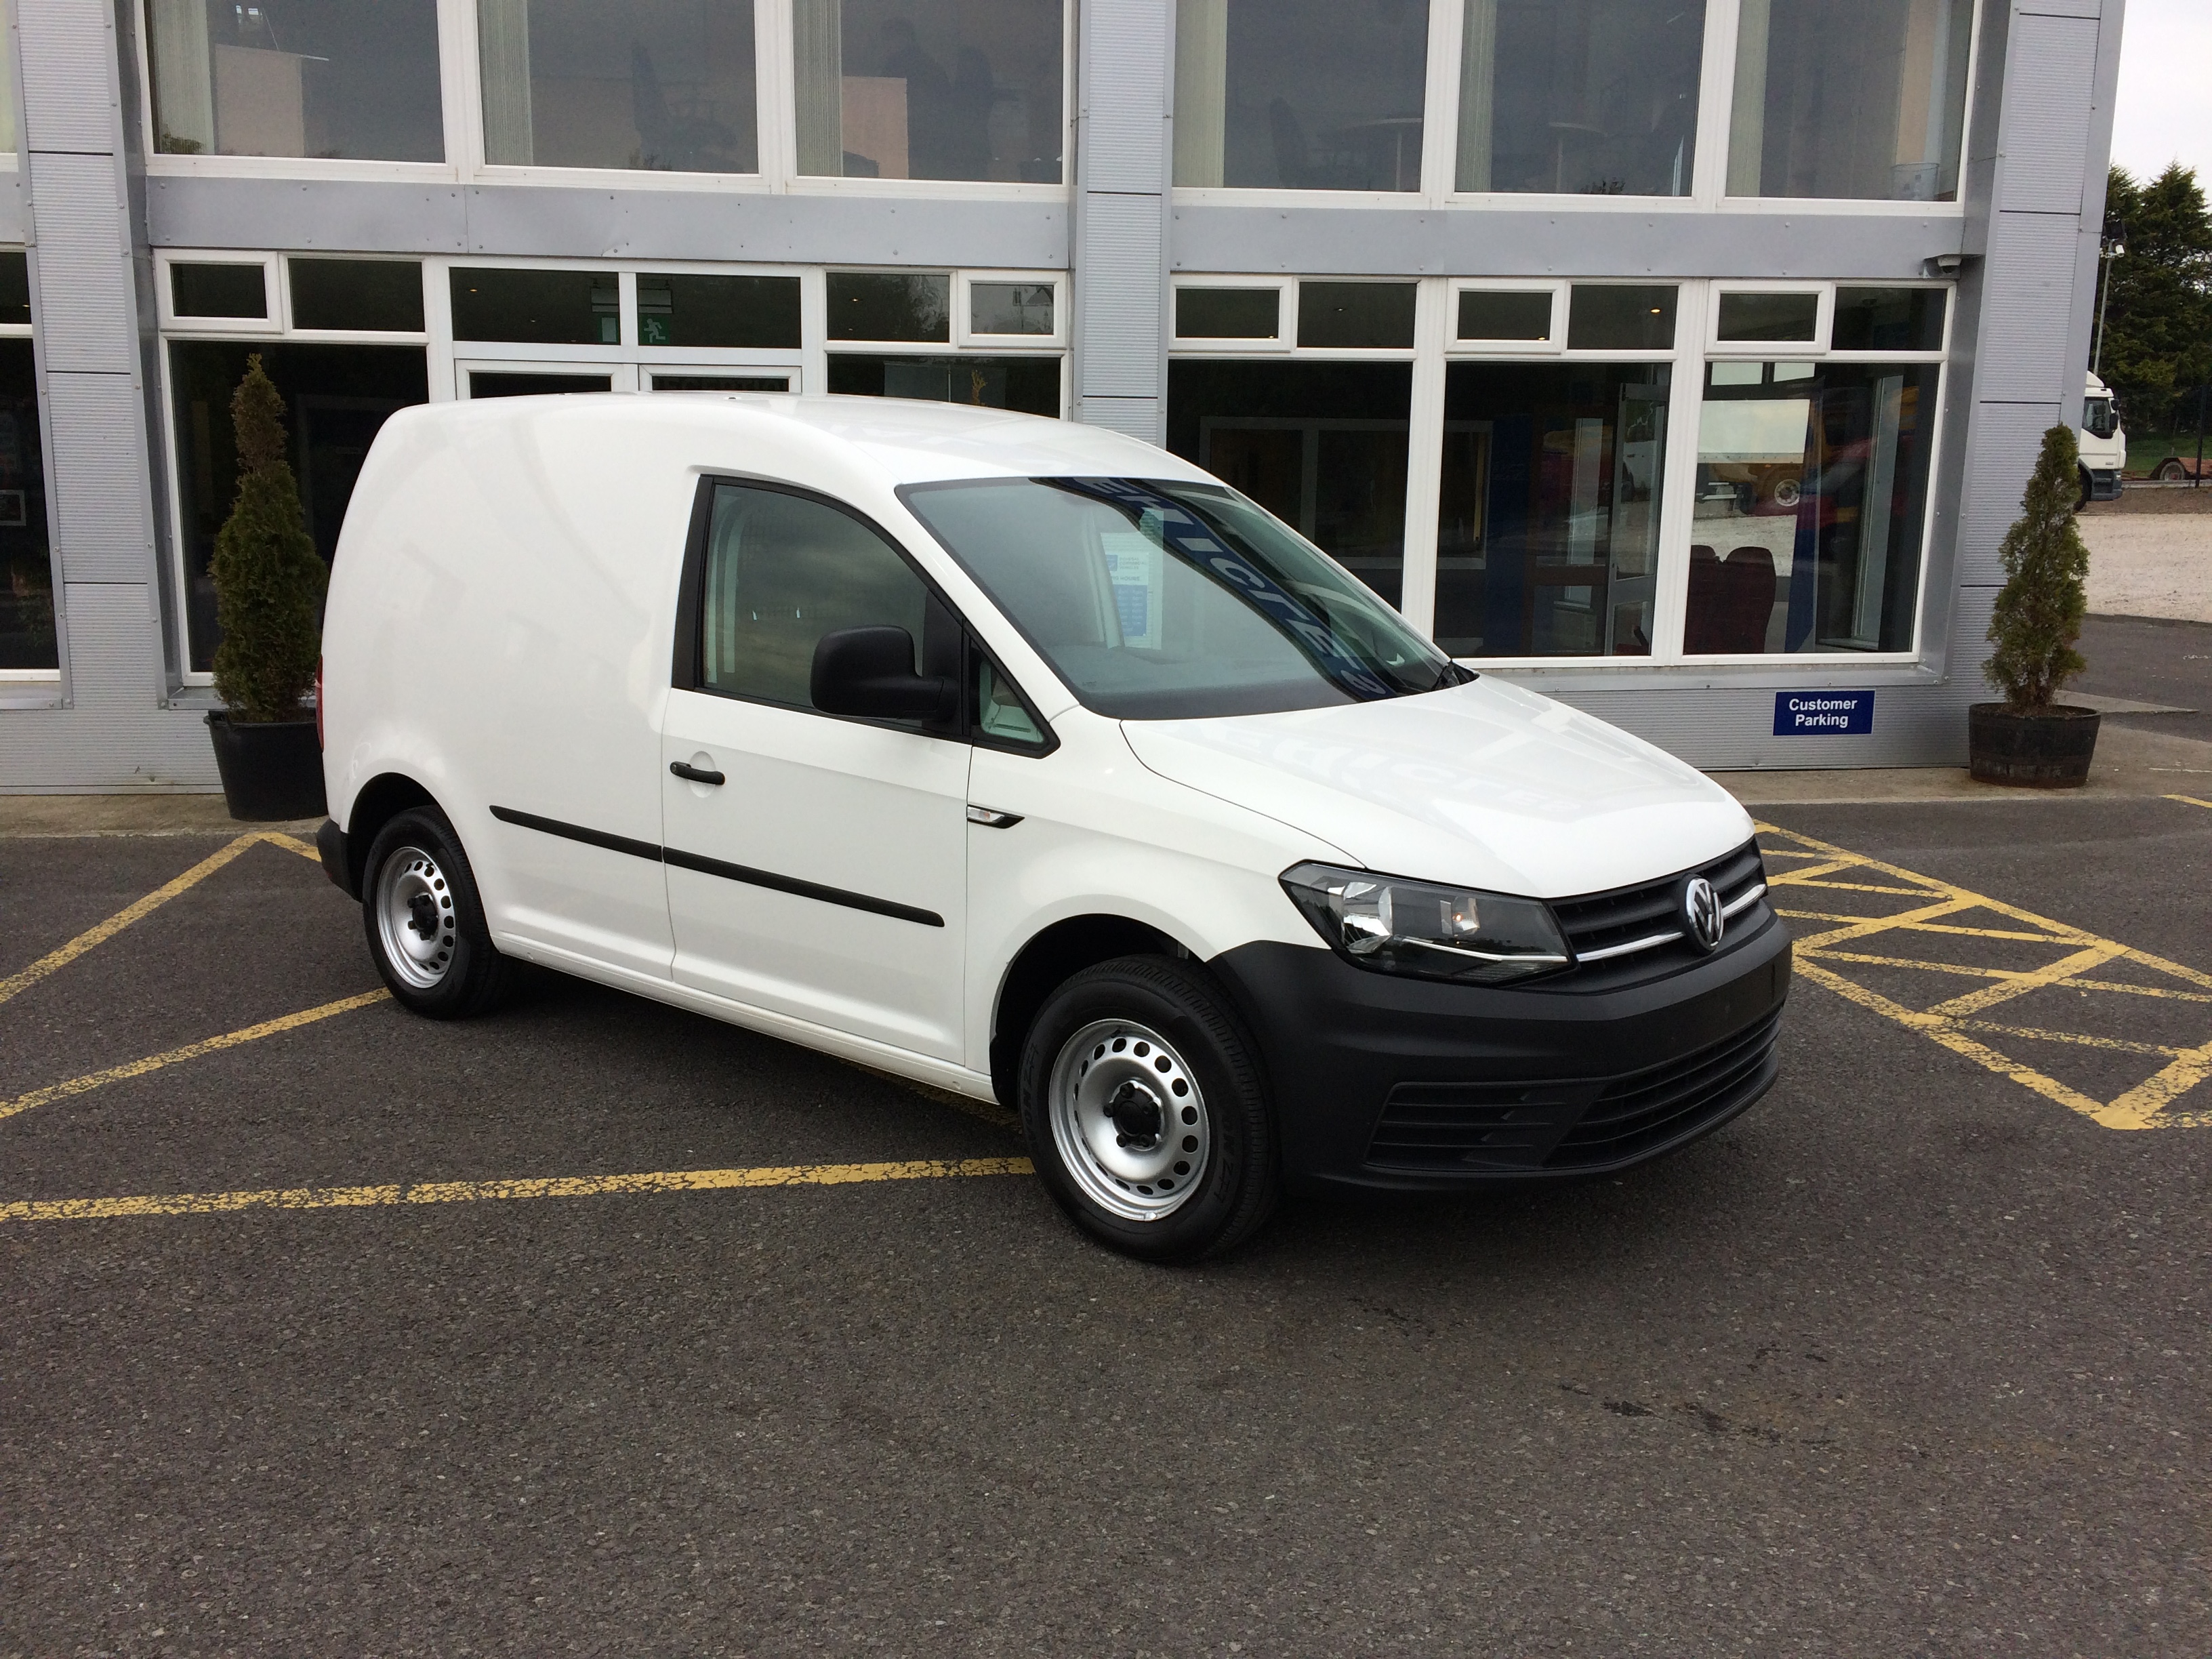 2016 Volkswagen Caddy C20 TDi Donegal Commercial Vehicles